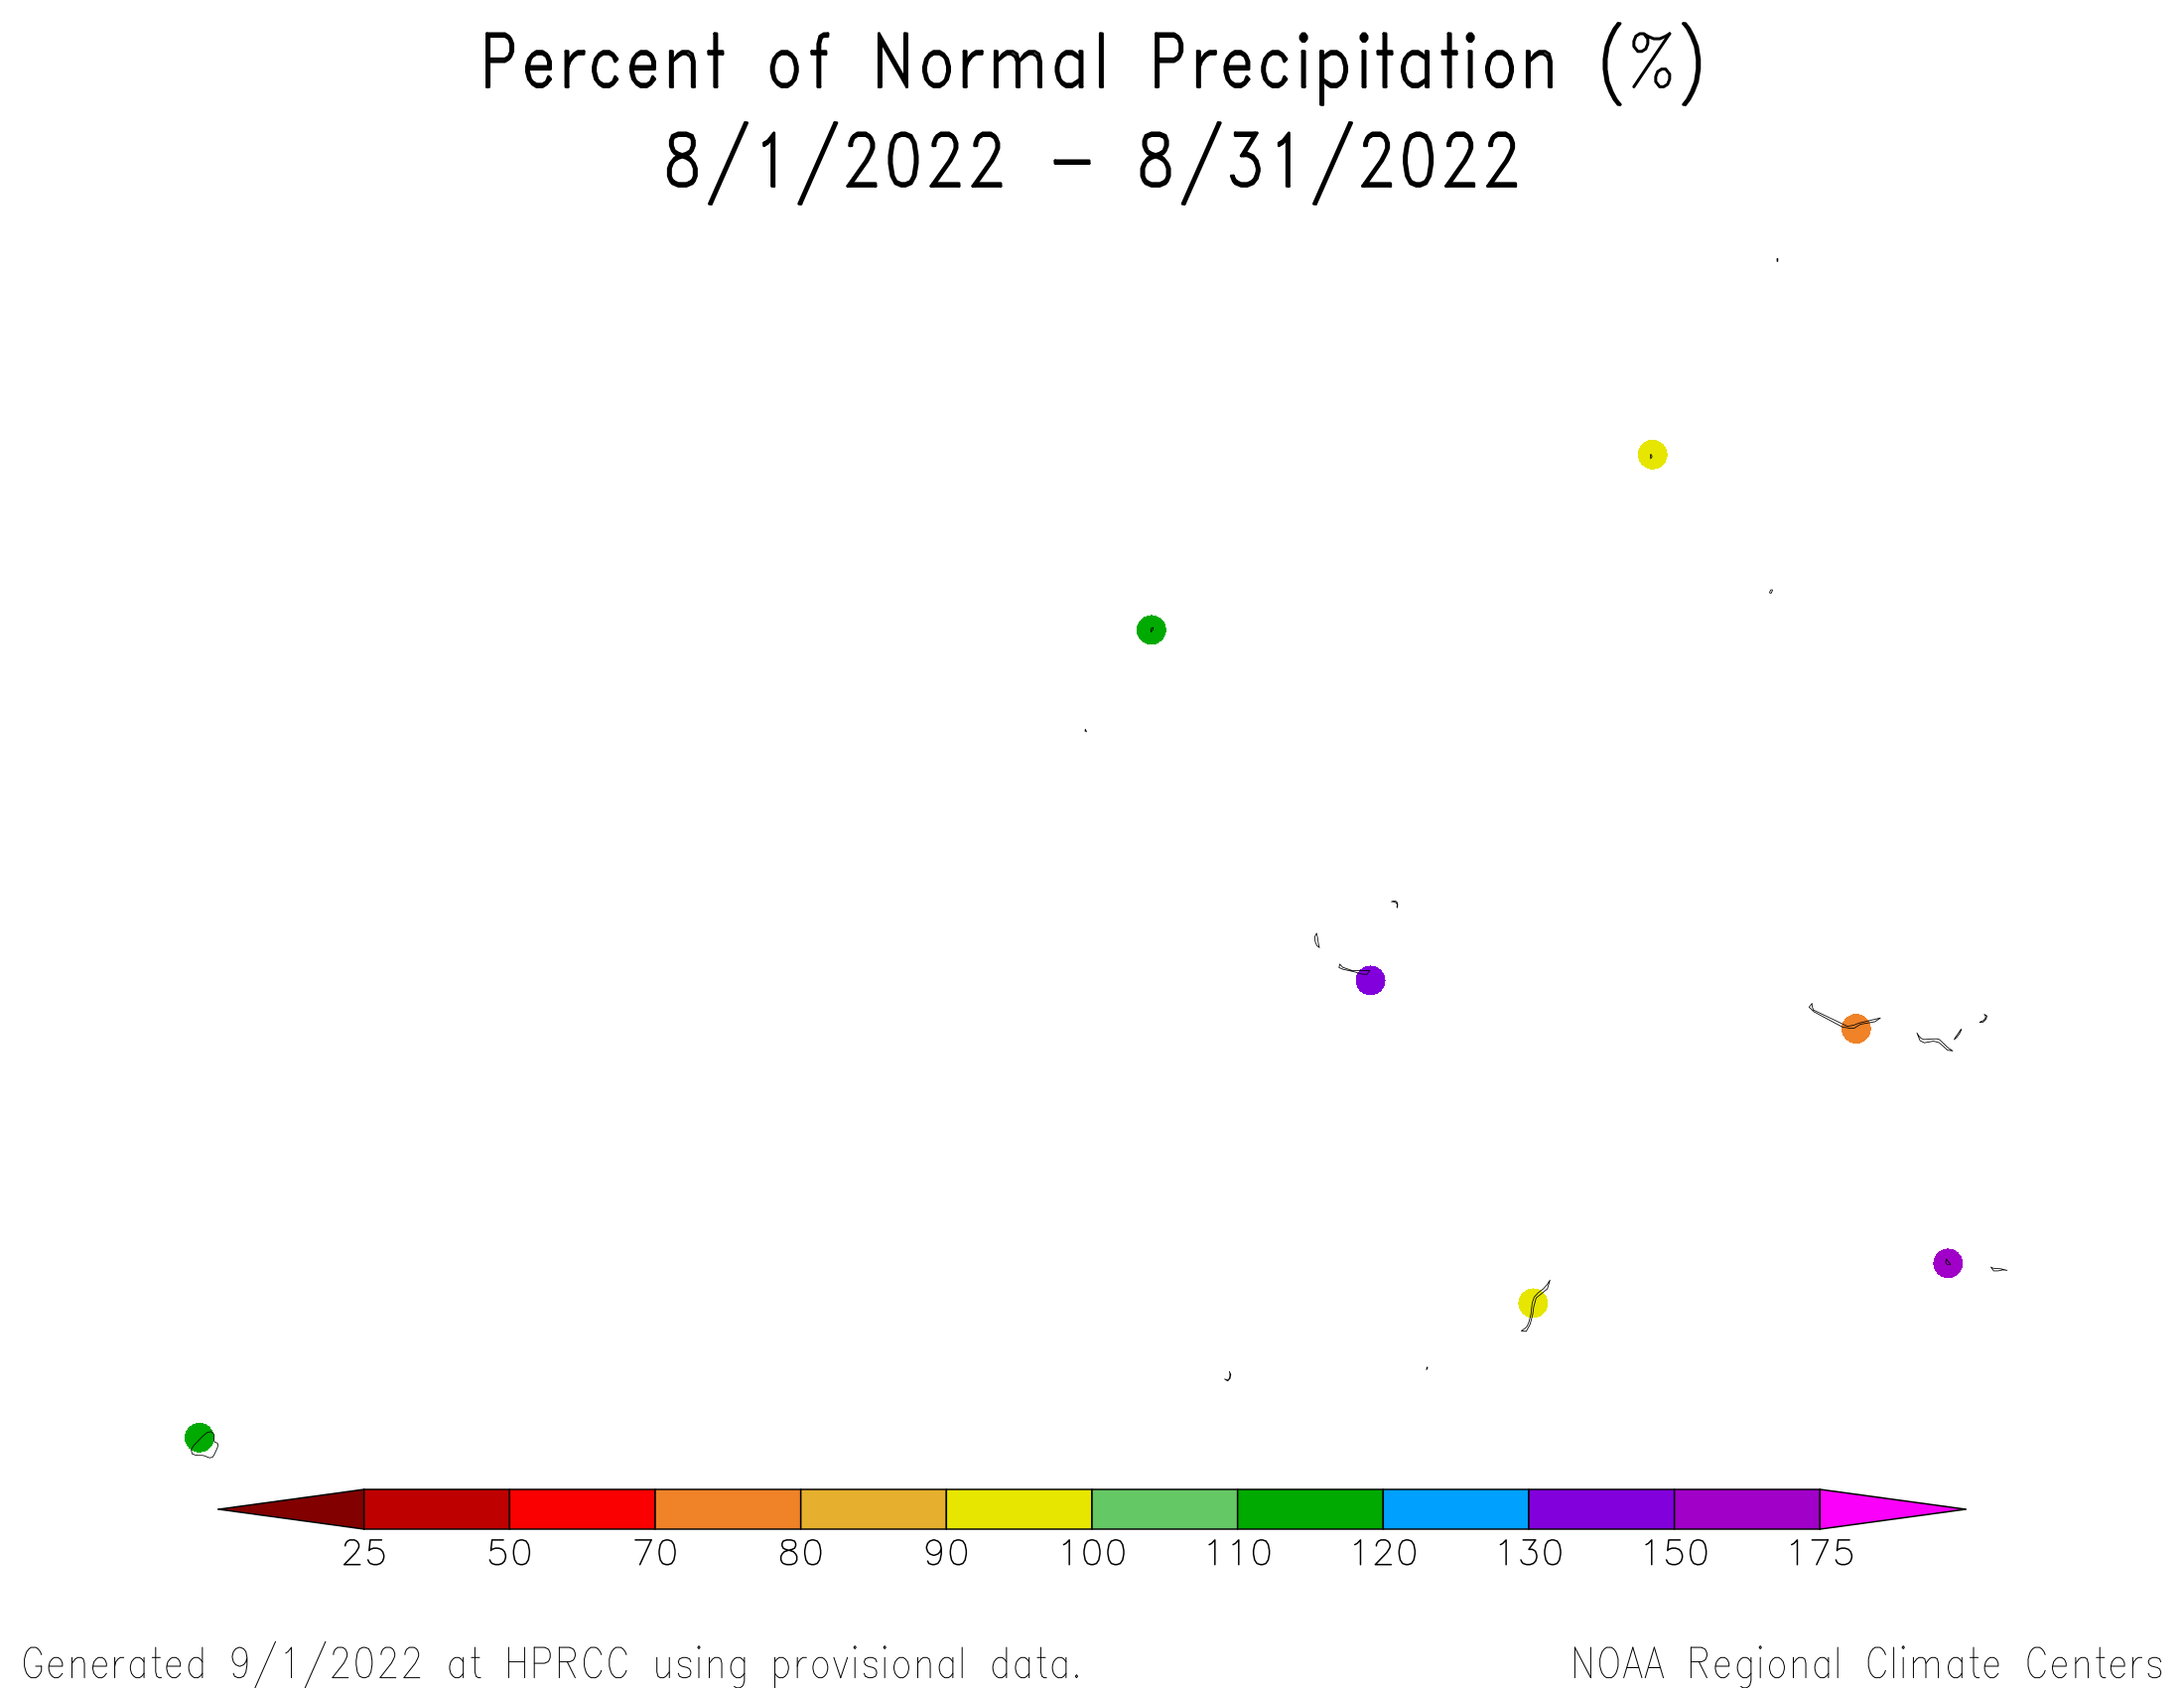 August 2022 Percent of Normal Precipitation for the Marshall Islands